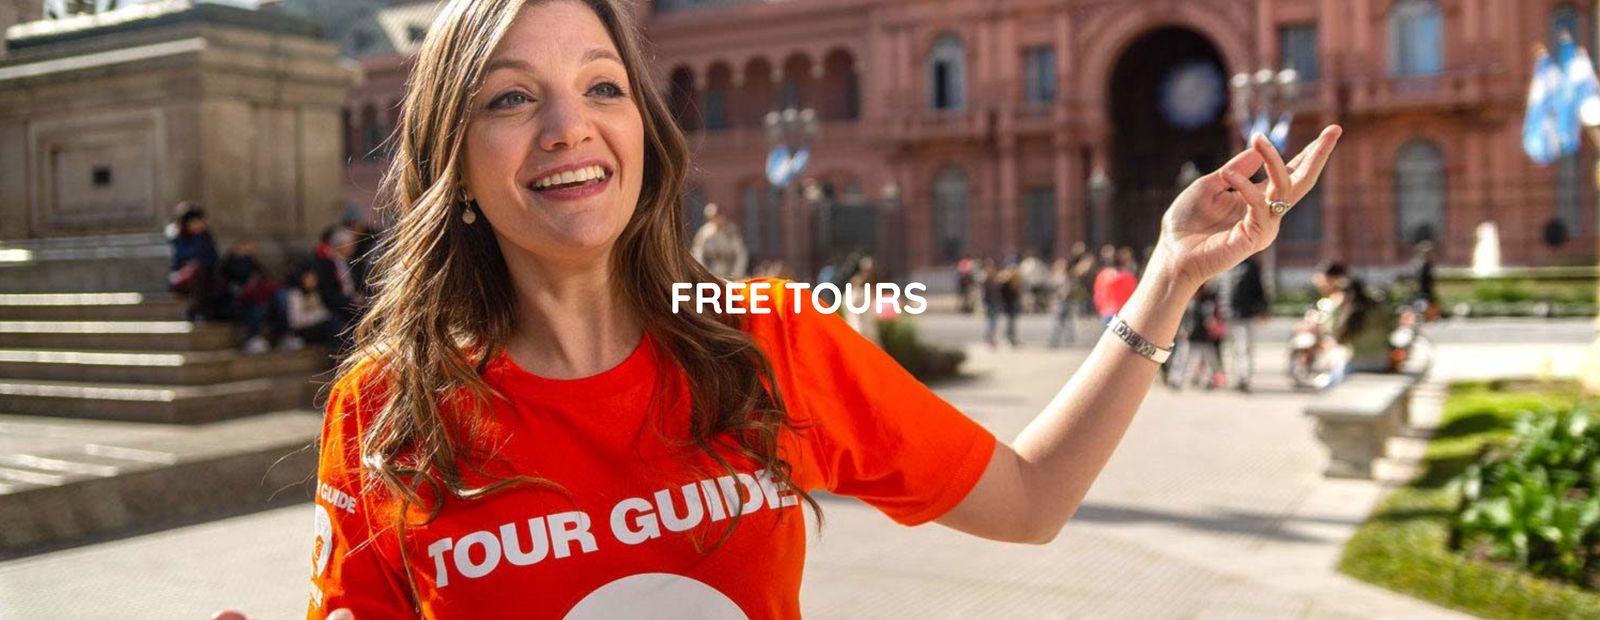 Free Walks Buenos Aires. Enjoy the city with free walking tours